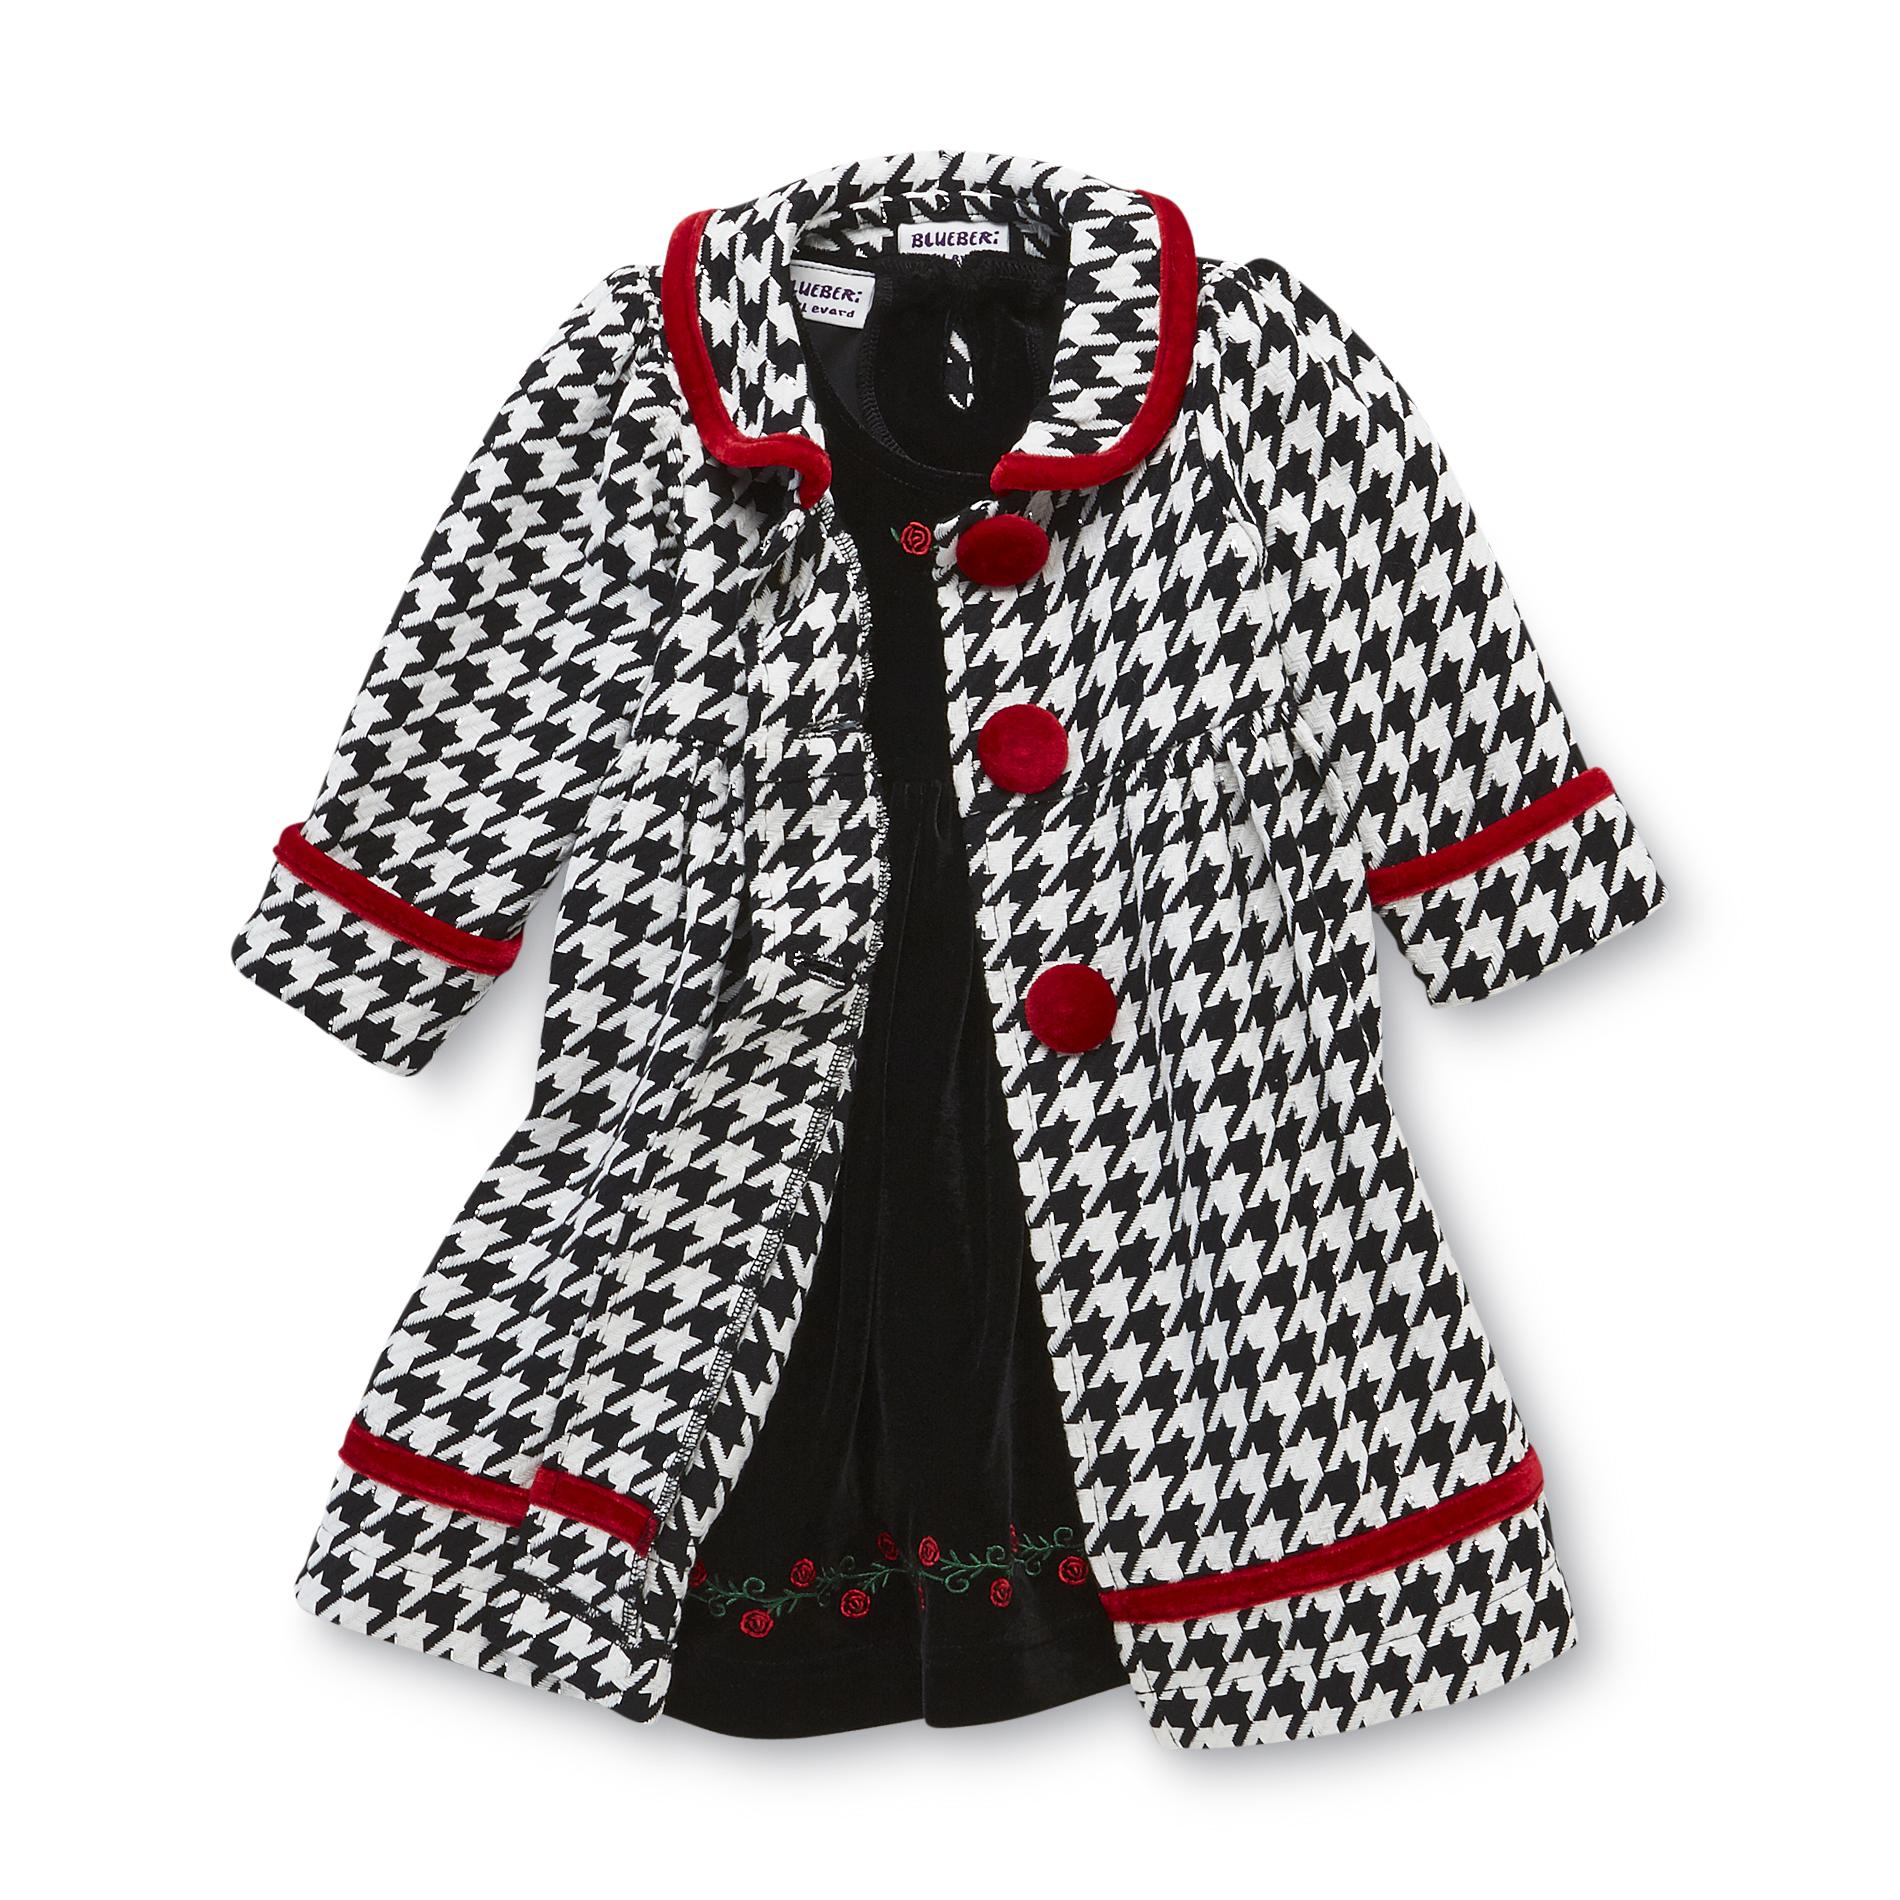 Holiday Editions Infant & Toddler Girl's Dress & Coat - Houndstooth Check